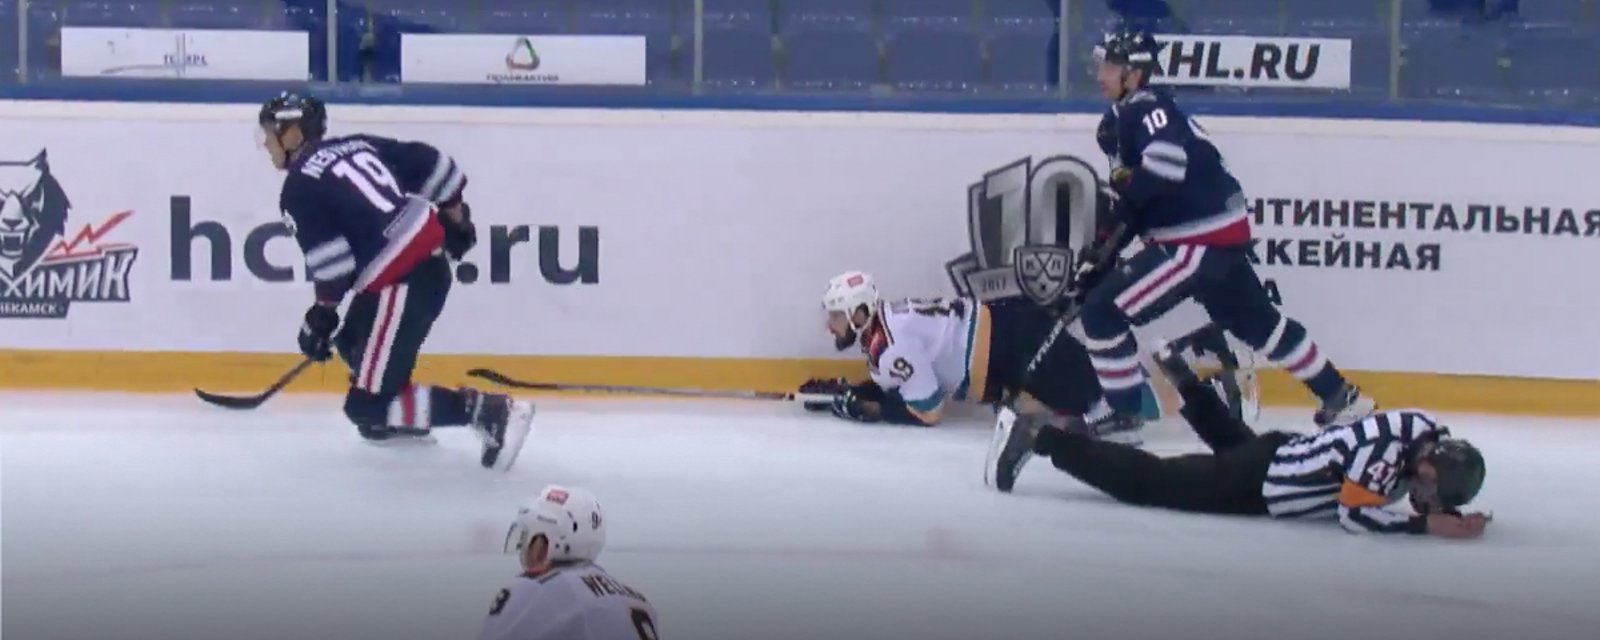 Breaking: KHL player suspended for DIRTY hit on ref